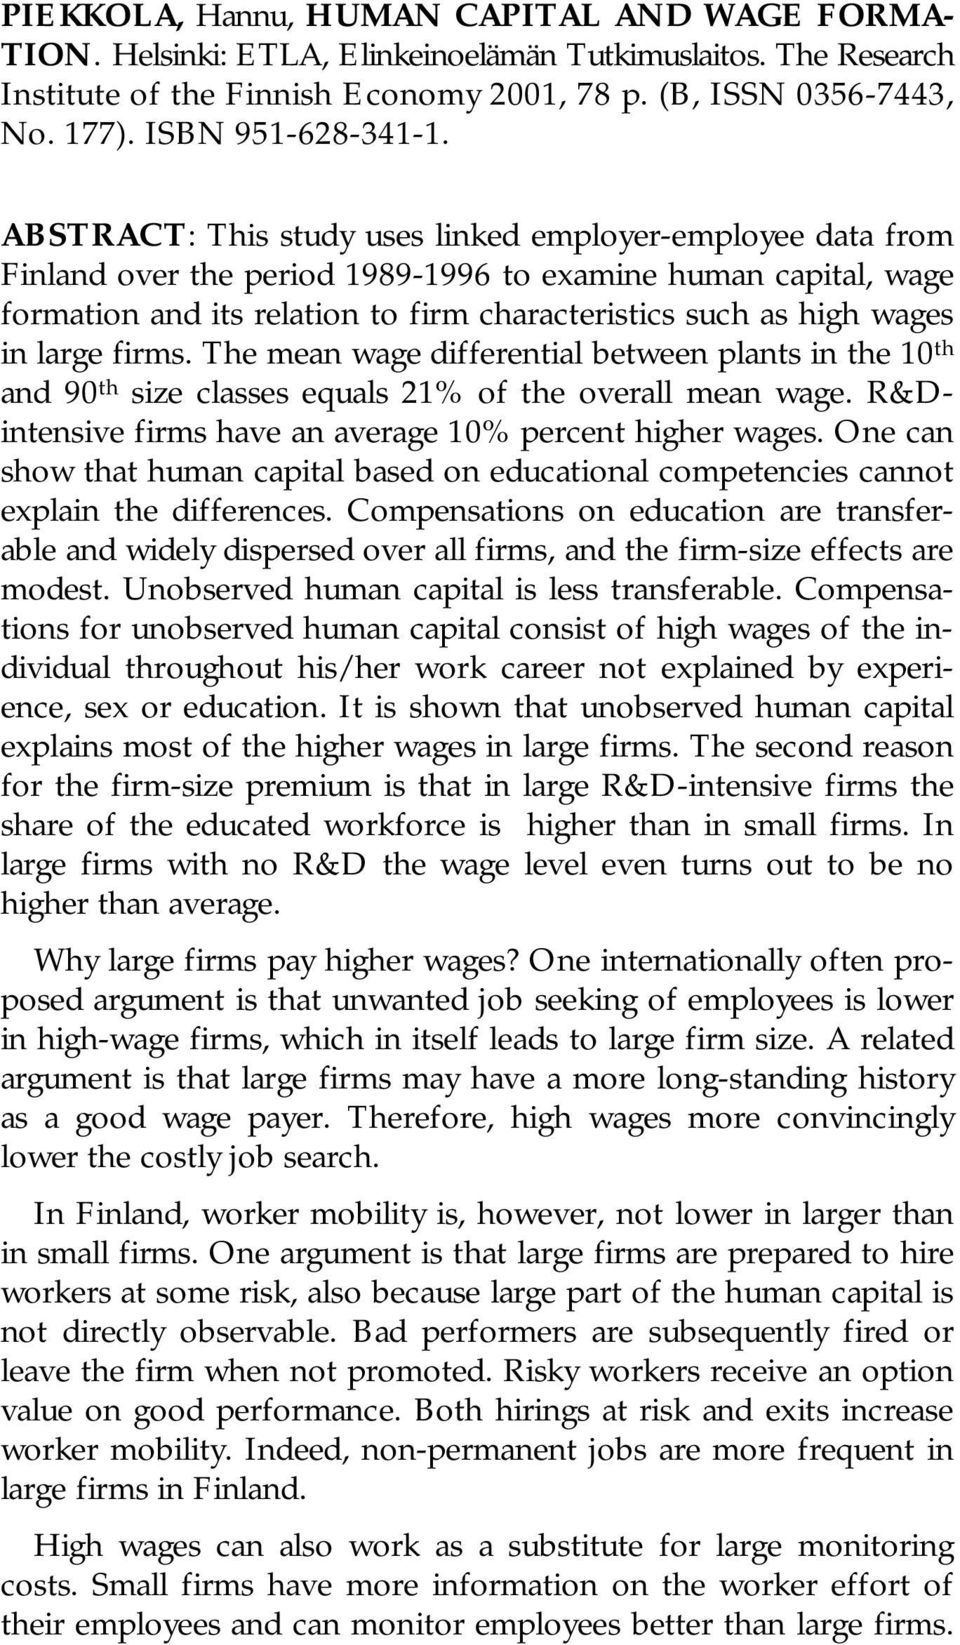 ABSTRACT: This study uses linked employer-employee data from Finland over the period 1989-1996 to examine human capital, wage formation and its relation to firm characteristics such as high wages in